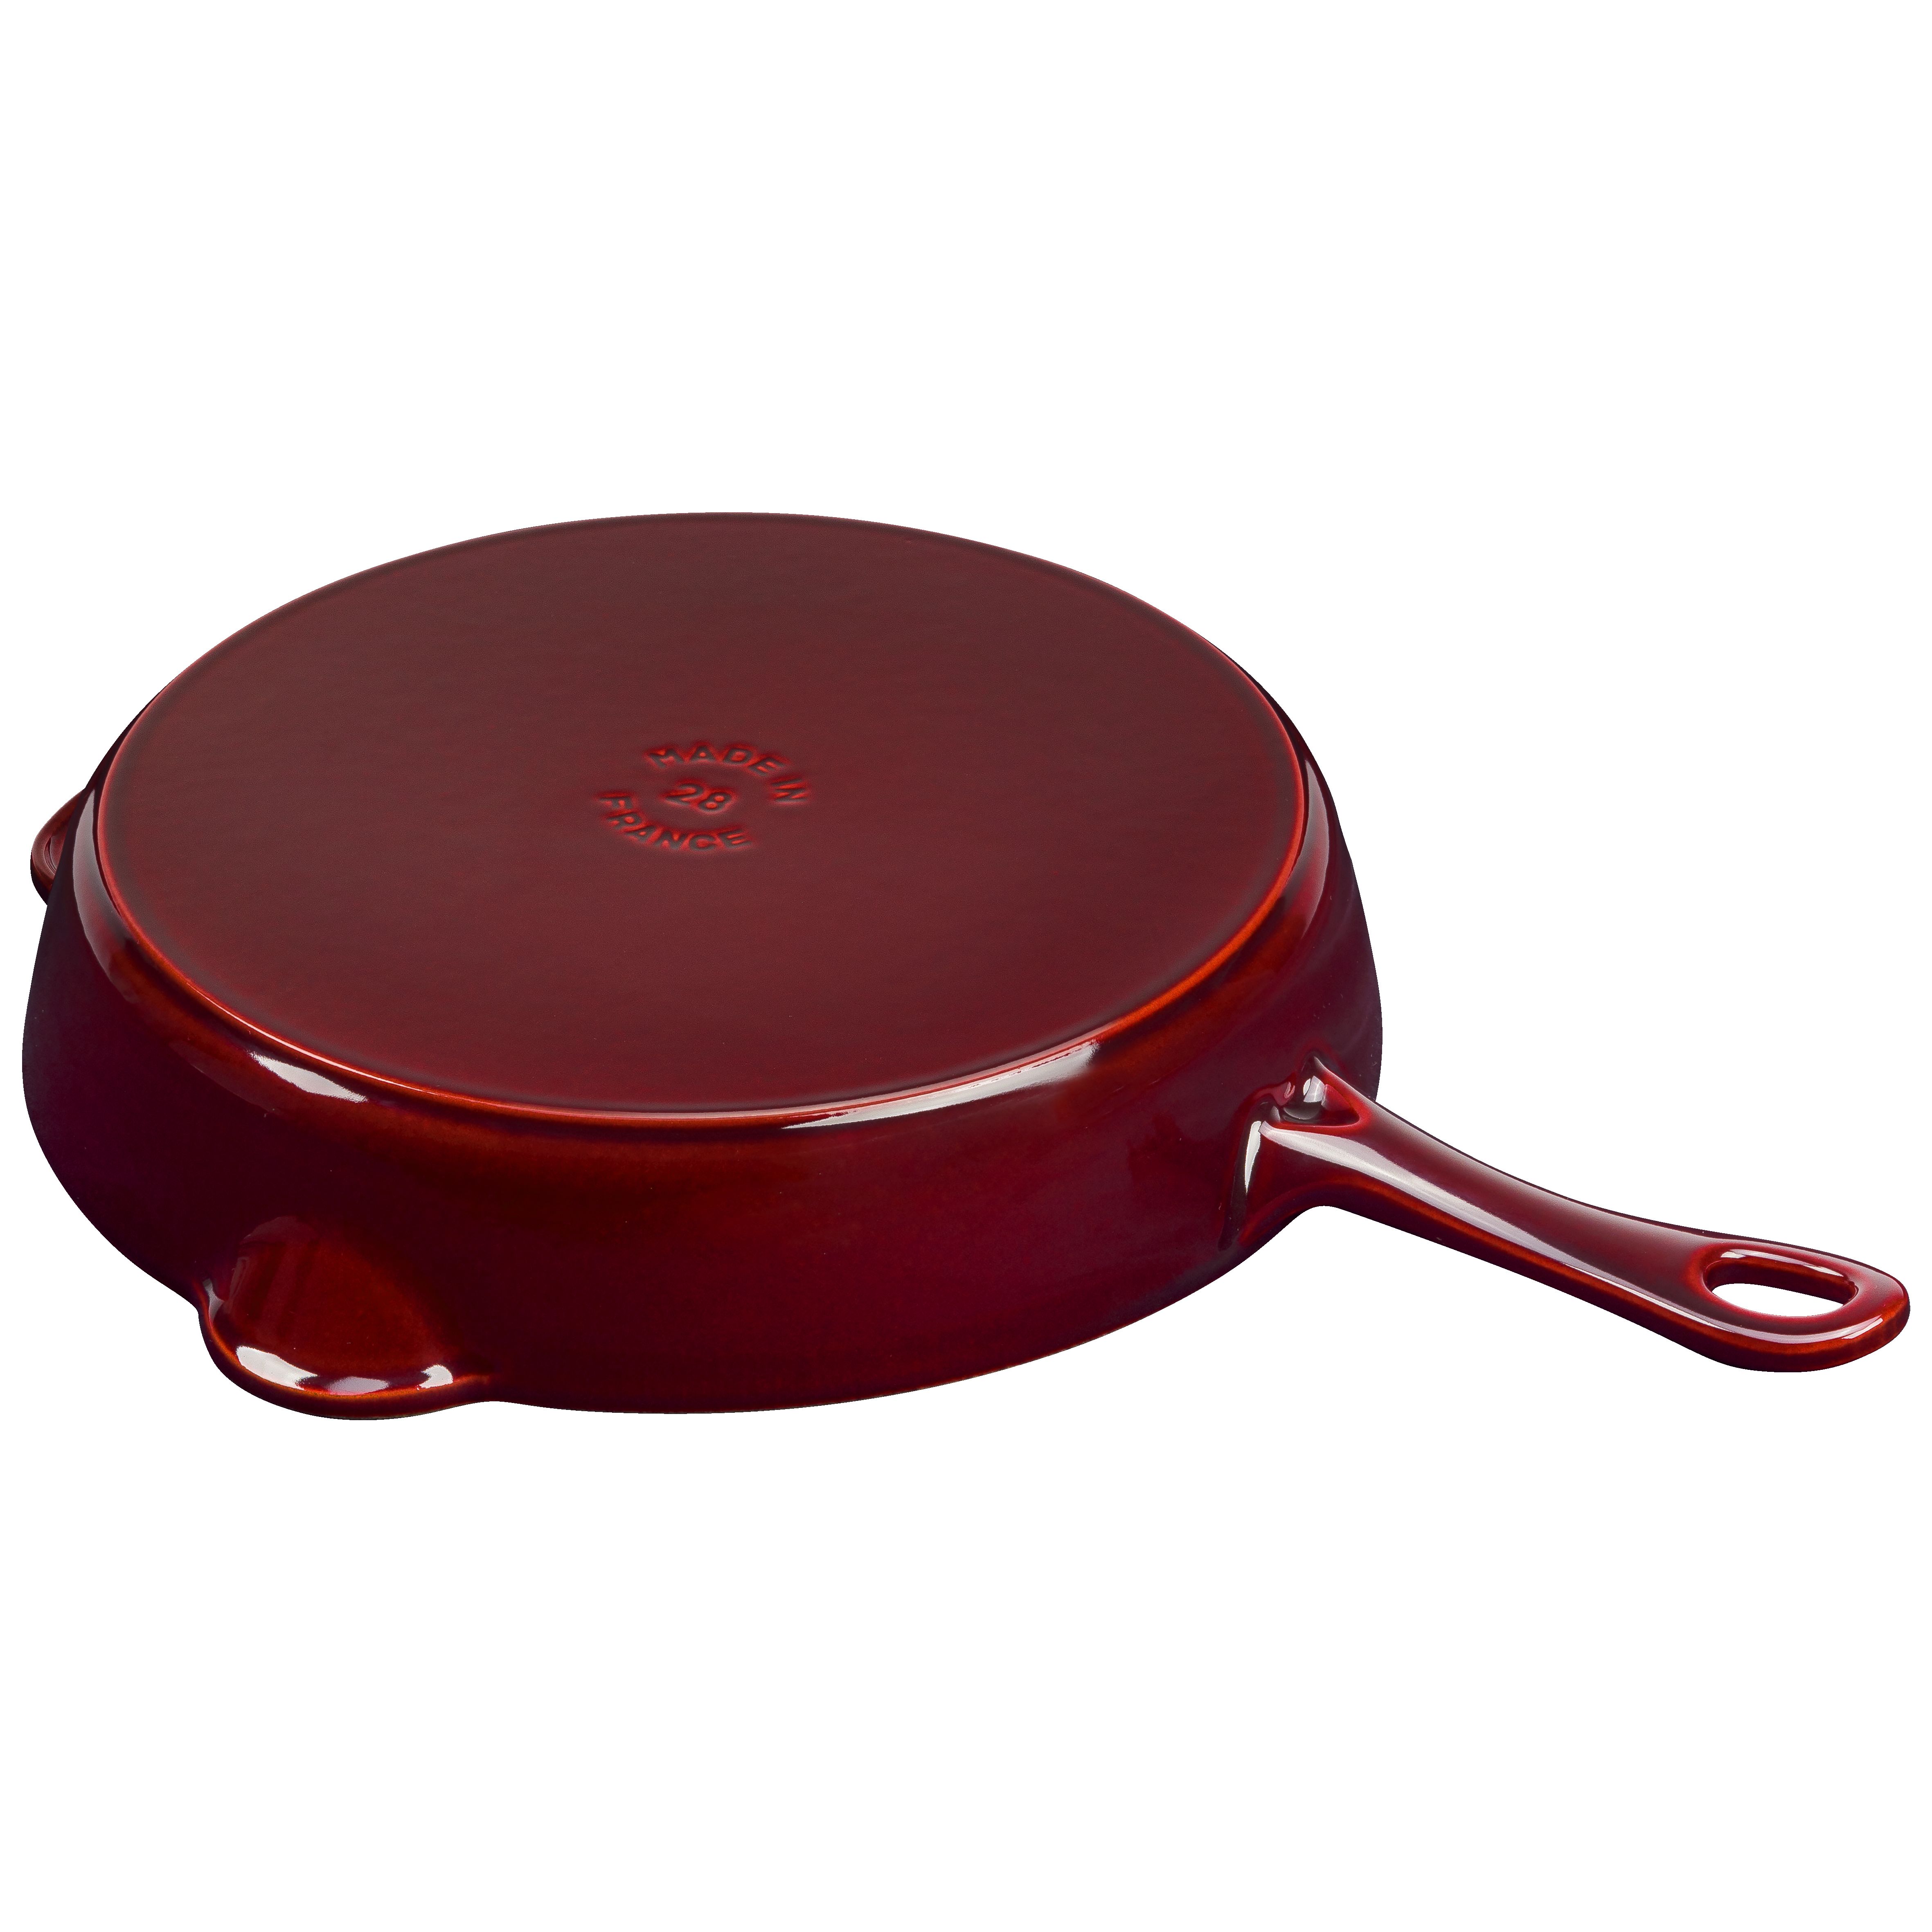 Staub Cast Iron - Fry Pans/ Skillets 11-Inch, Traditional Deep Skillet, Cherry